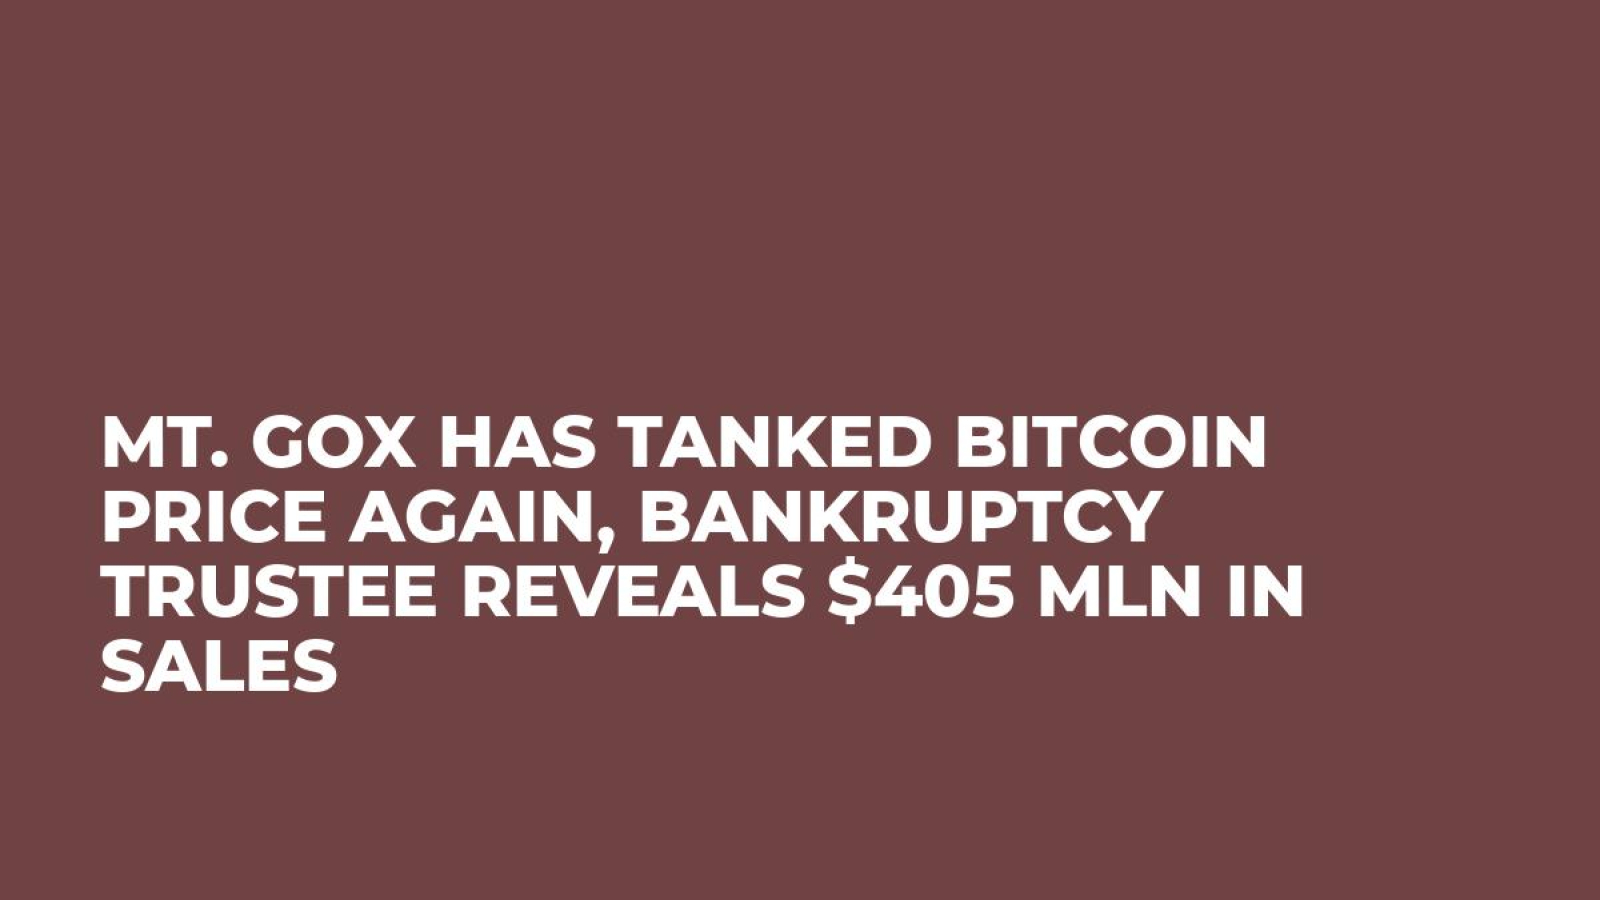 Mt. Gox Has Tanked Bitcoin Price Again, Bankruptcy Trustee Reveals $405 Mln in Sales